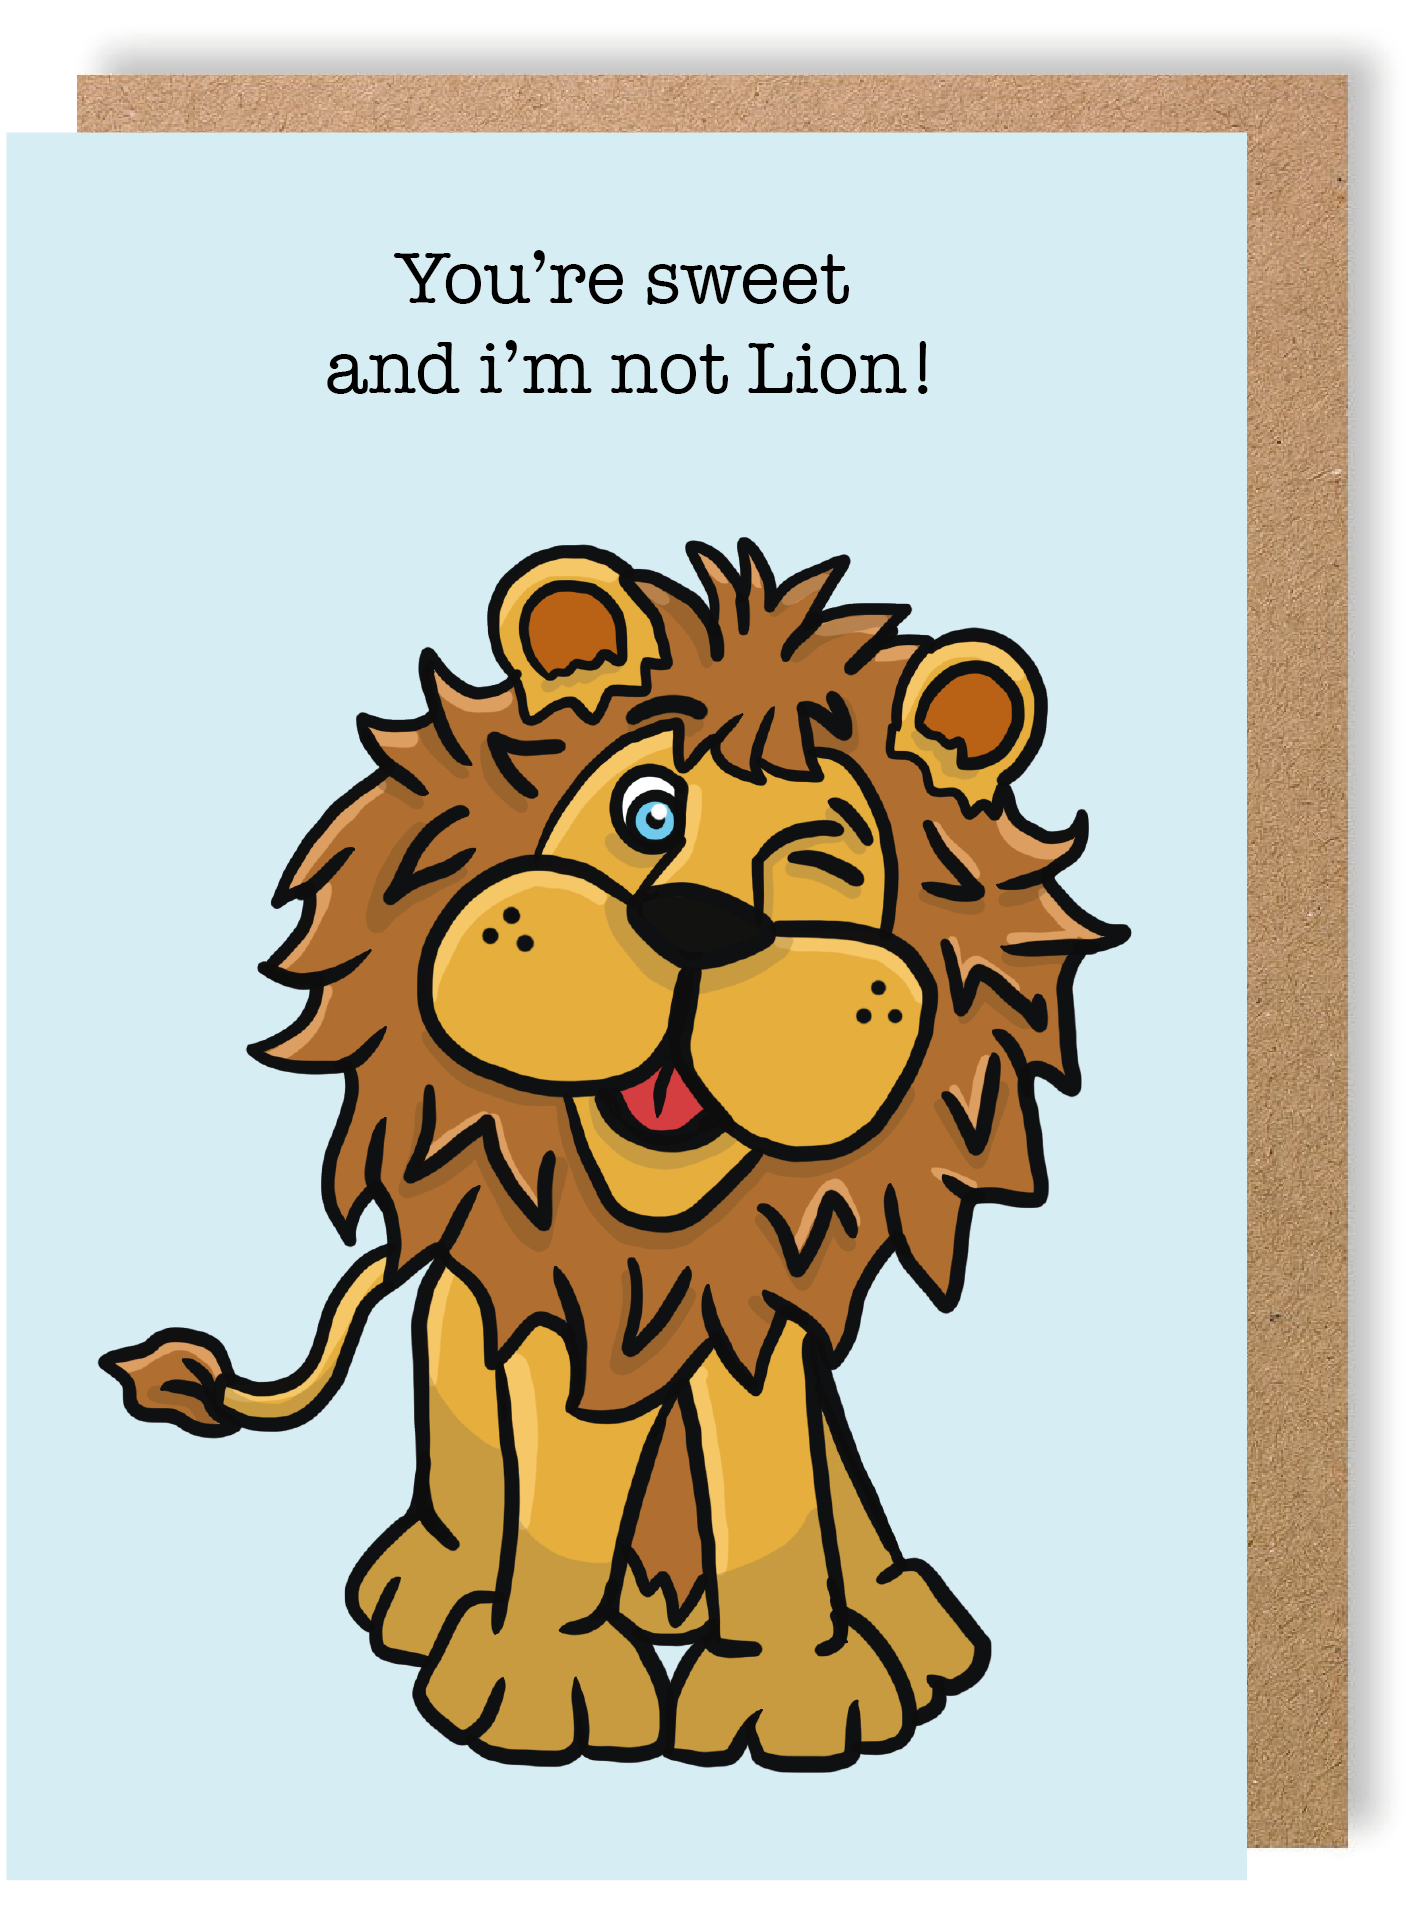 You’re Sweet and I'm Not Lion - Lion - Greetings Card - LukeHorton Art